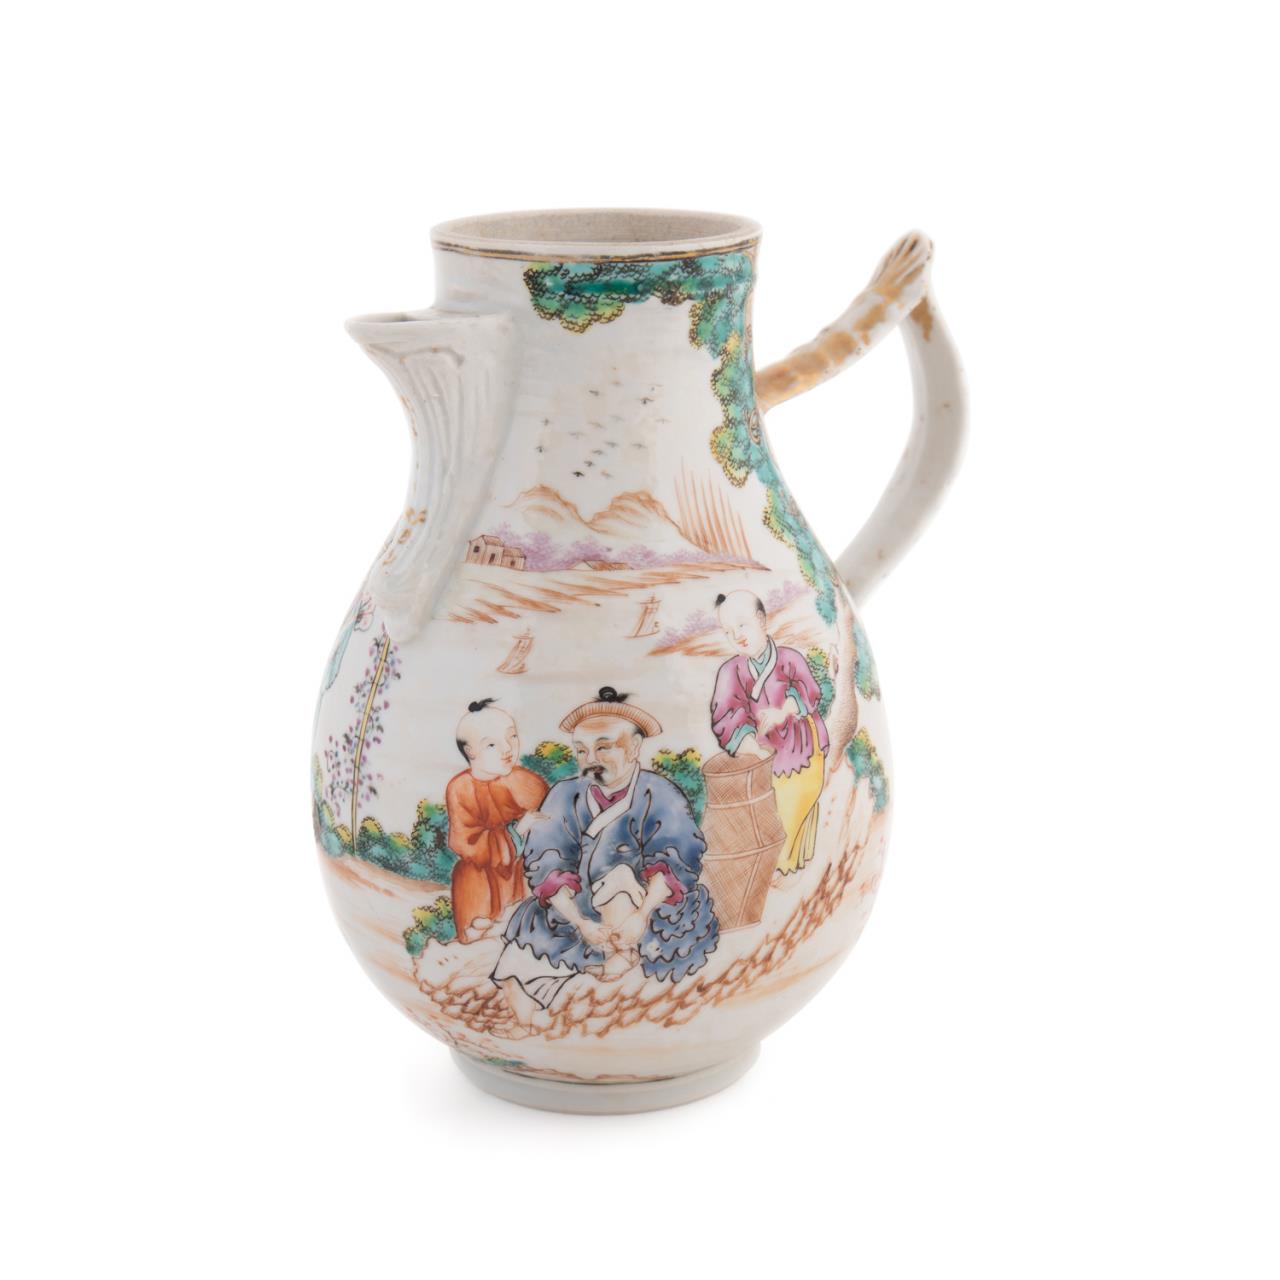 CHINESE EXPORT FAMILLE ROSE PORCELAIN 2bfbaa